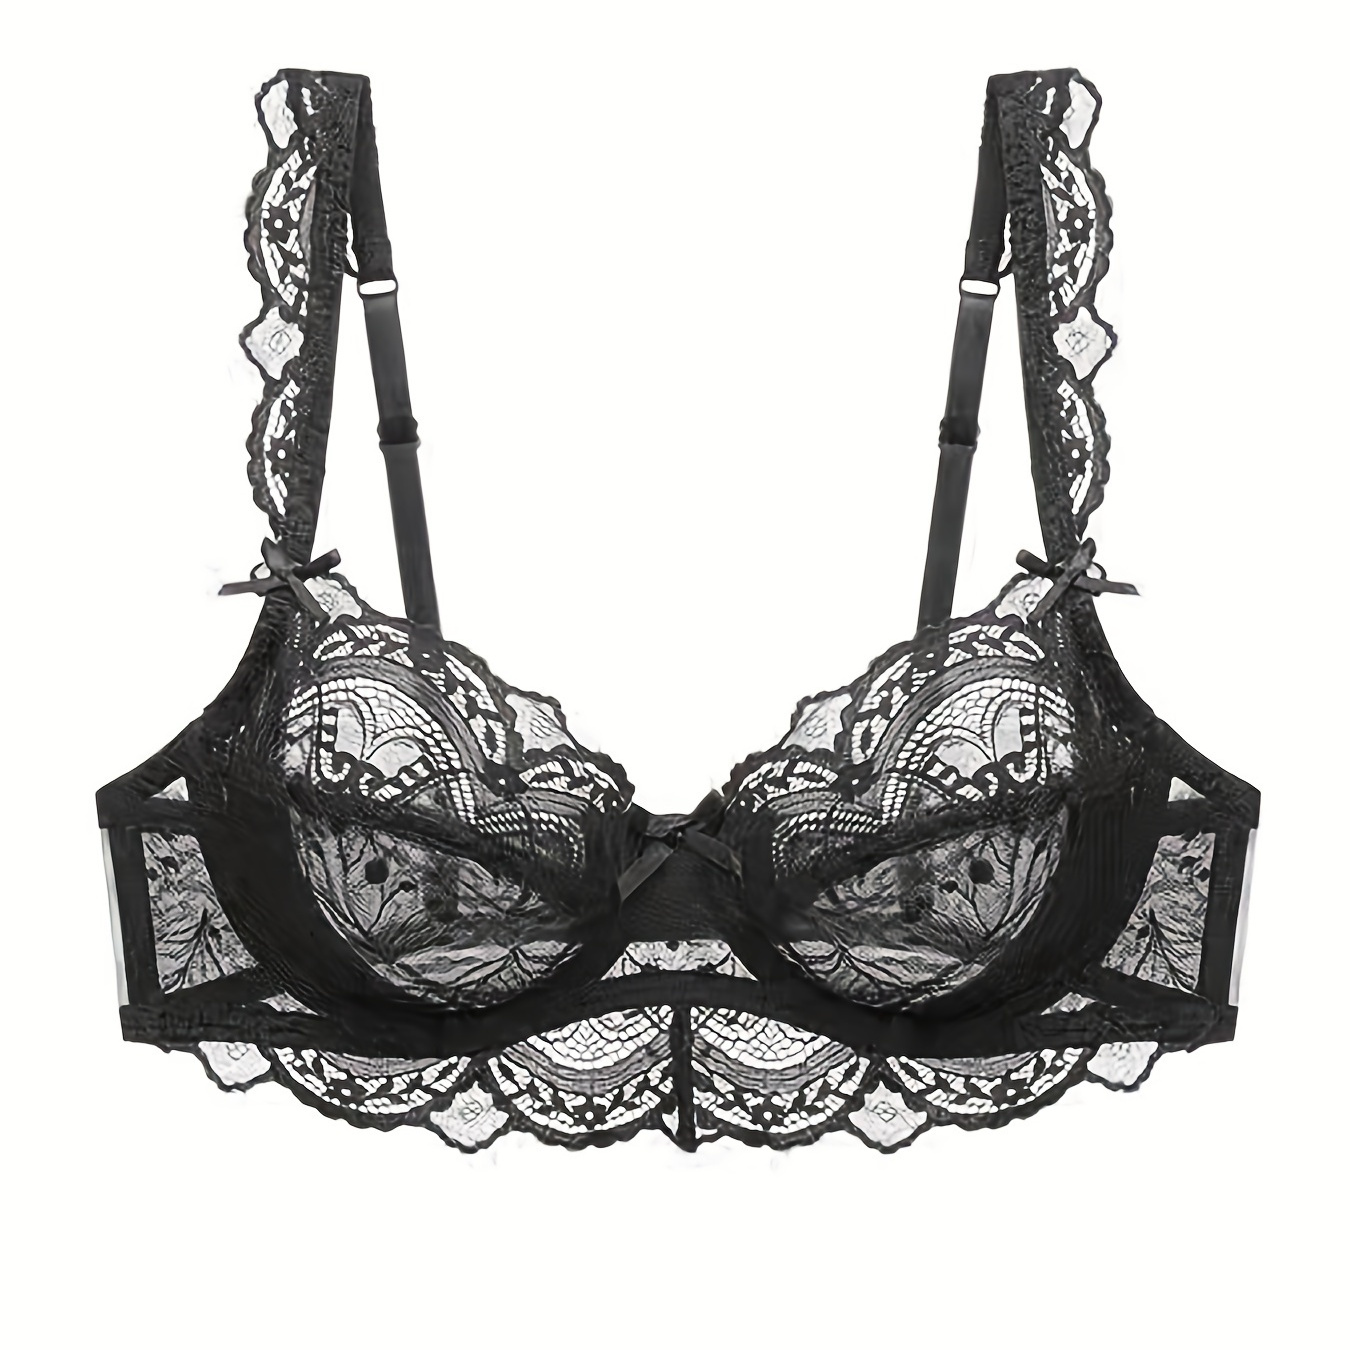 

Semi-sheer Lace Mesh Everyday Bras, Breathable & Preppy Style Thin Cup Intimates Bra, Women's Lingerie & Underwear